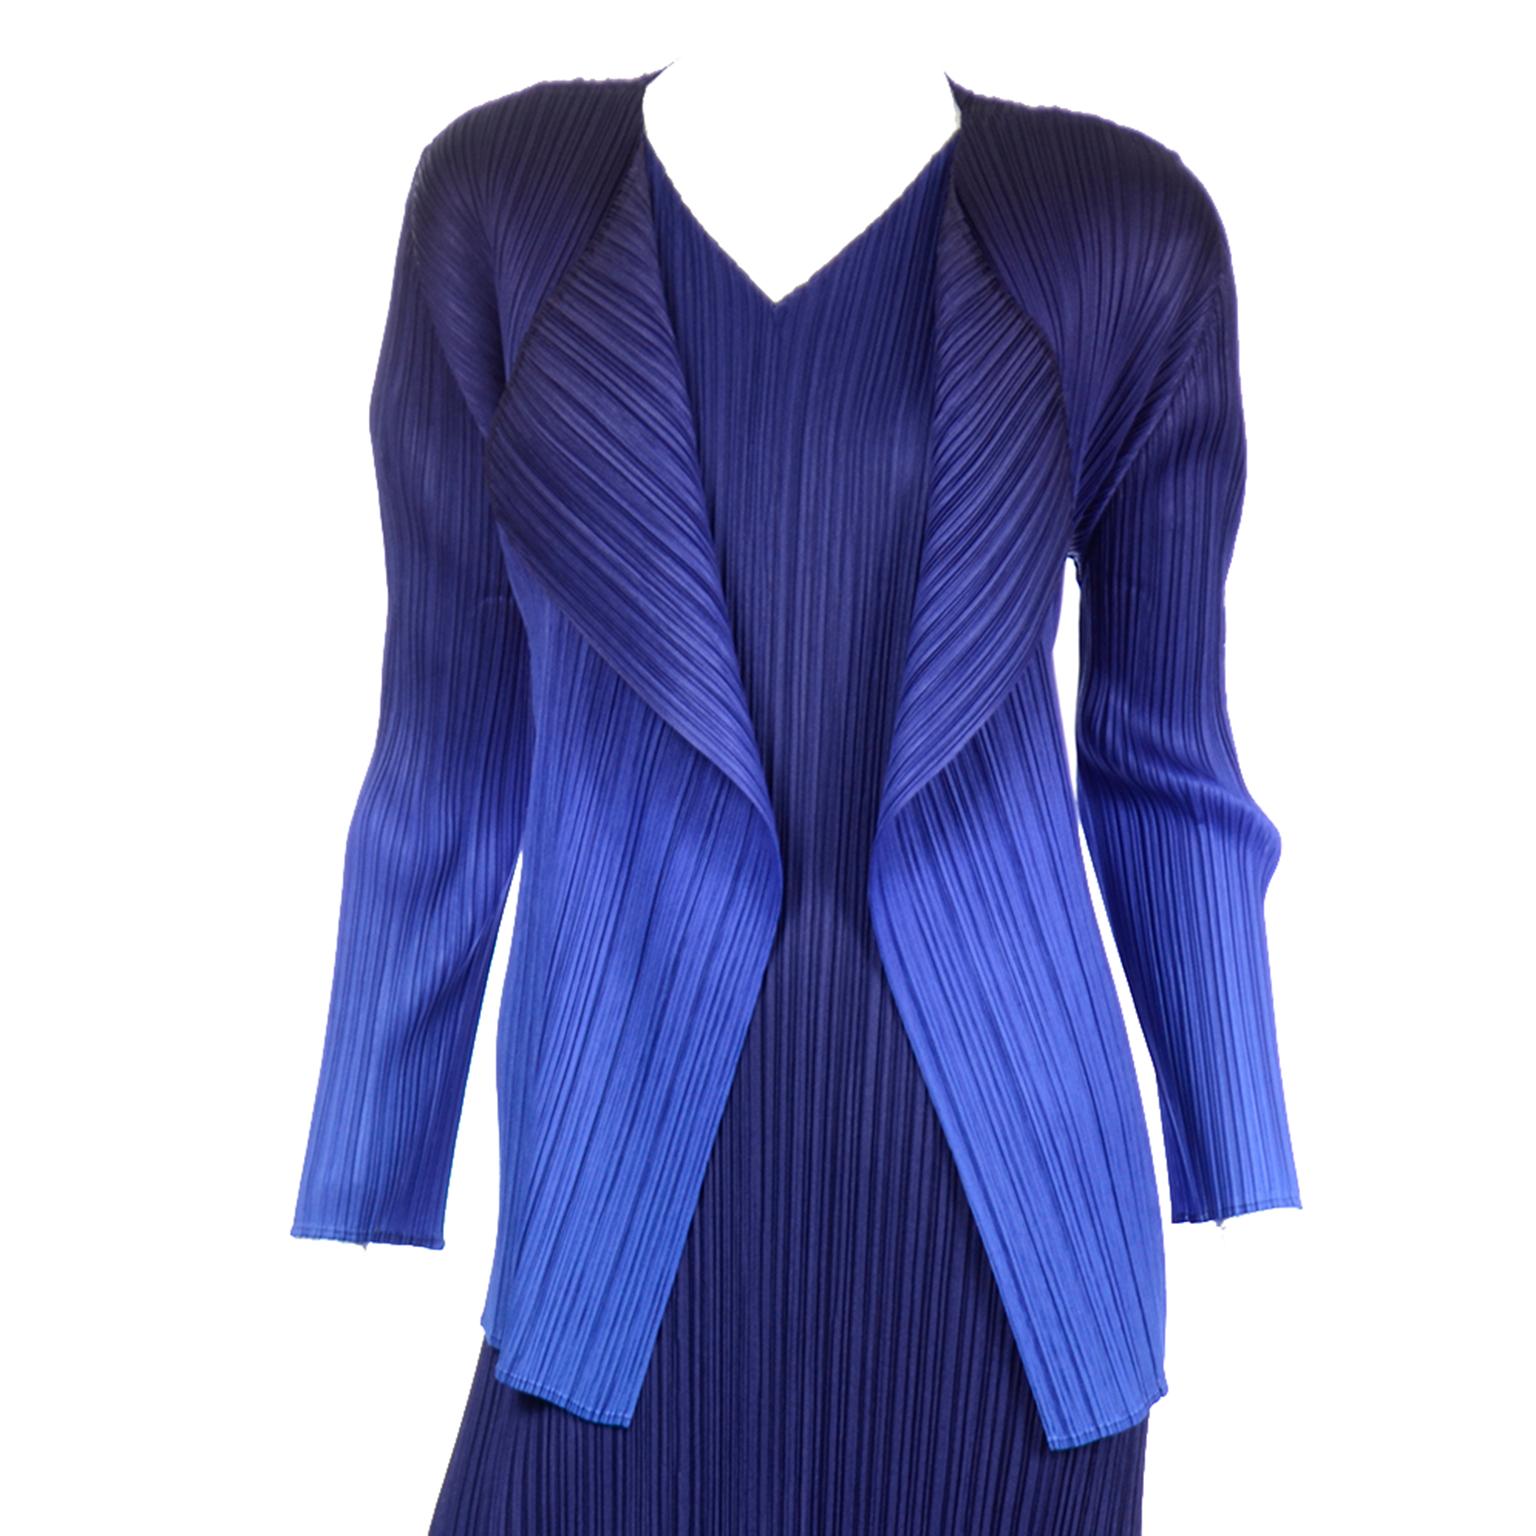 Issey Miyake Pleats Please Blue Dress & Ombre Jacket Outfit 3